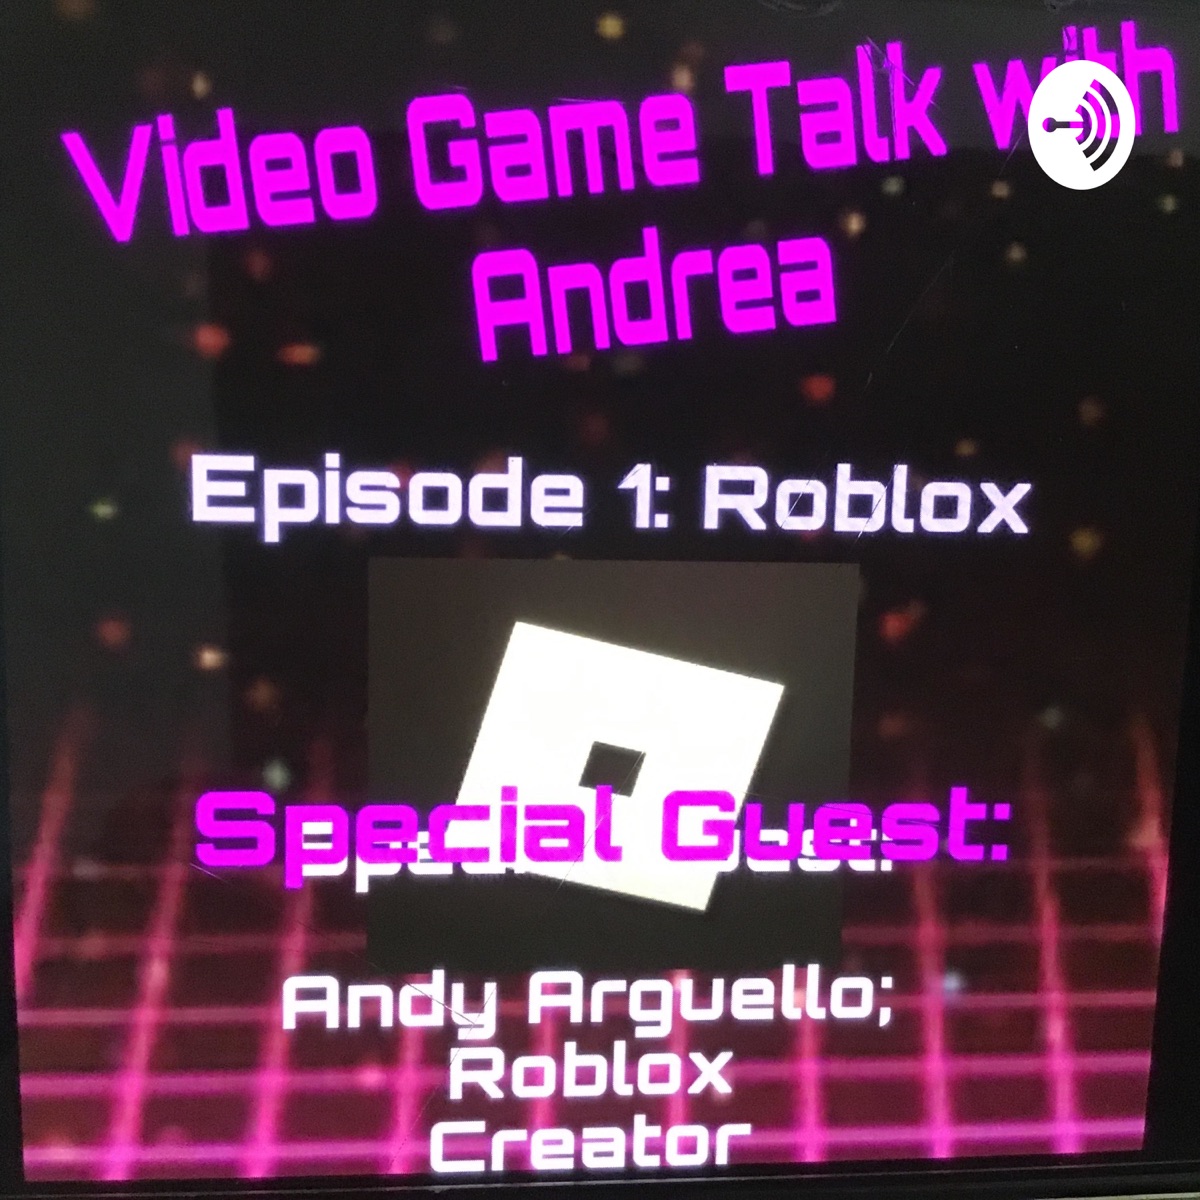 Related Roblox Podcast Podtail - e9 roblox